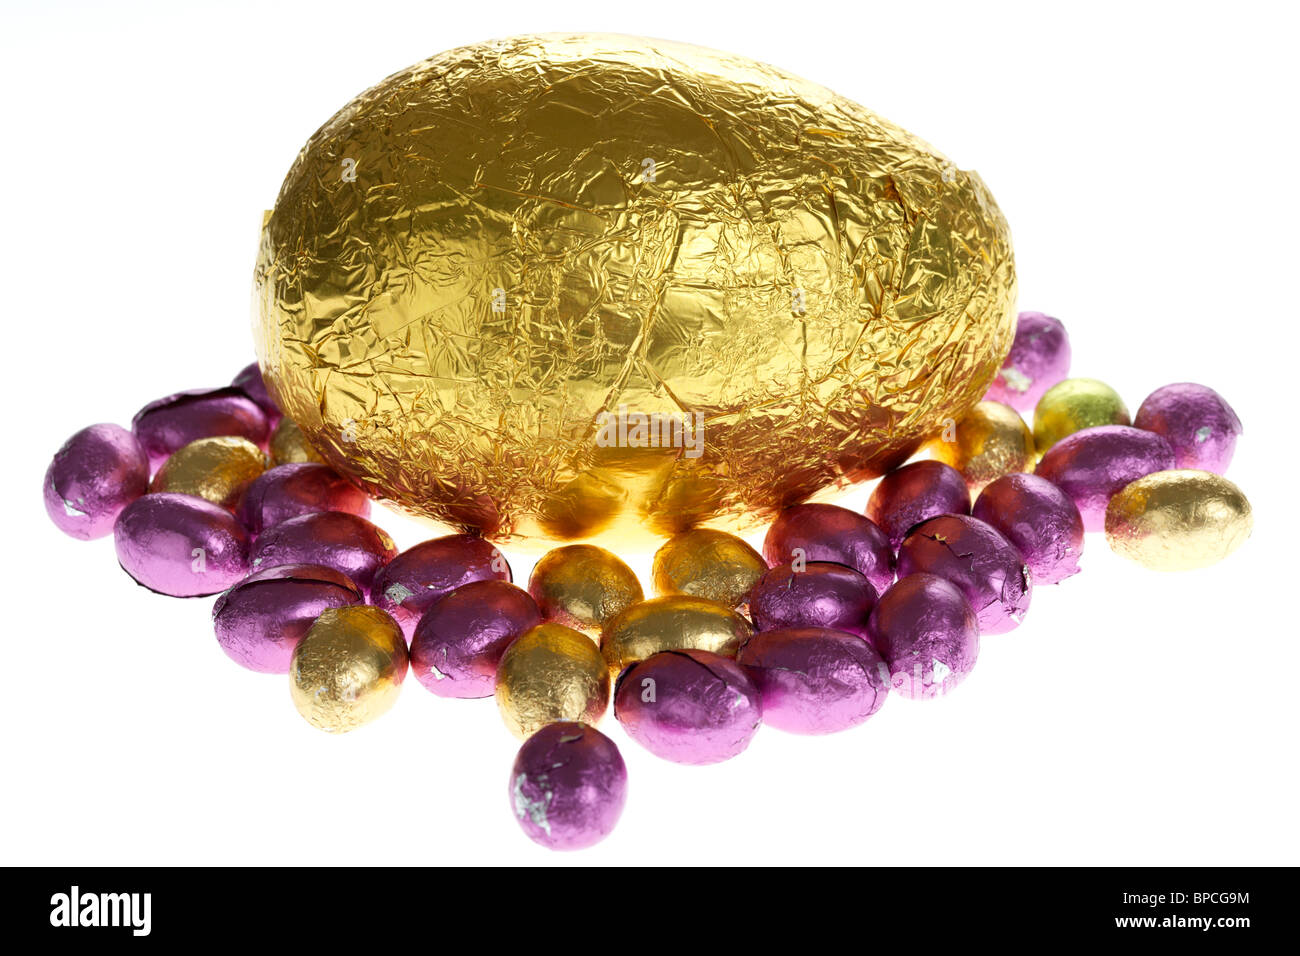 large and small gold foil wrapped chocolate easter eggs on white Stock Photo